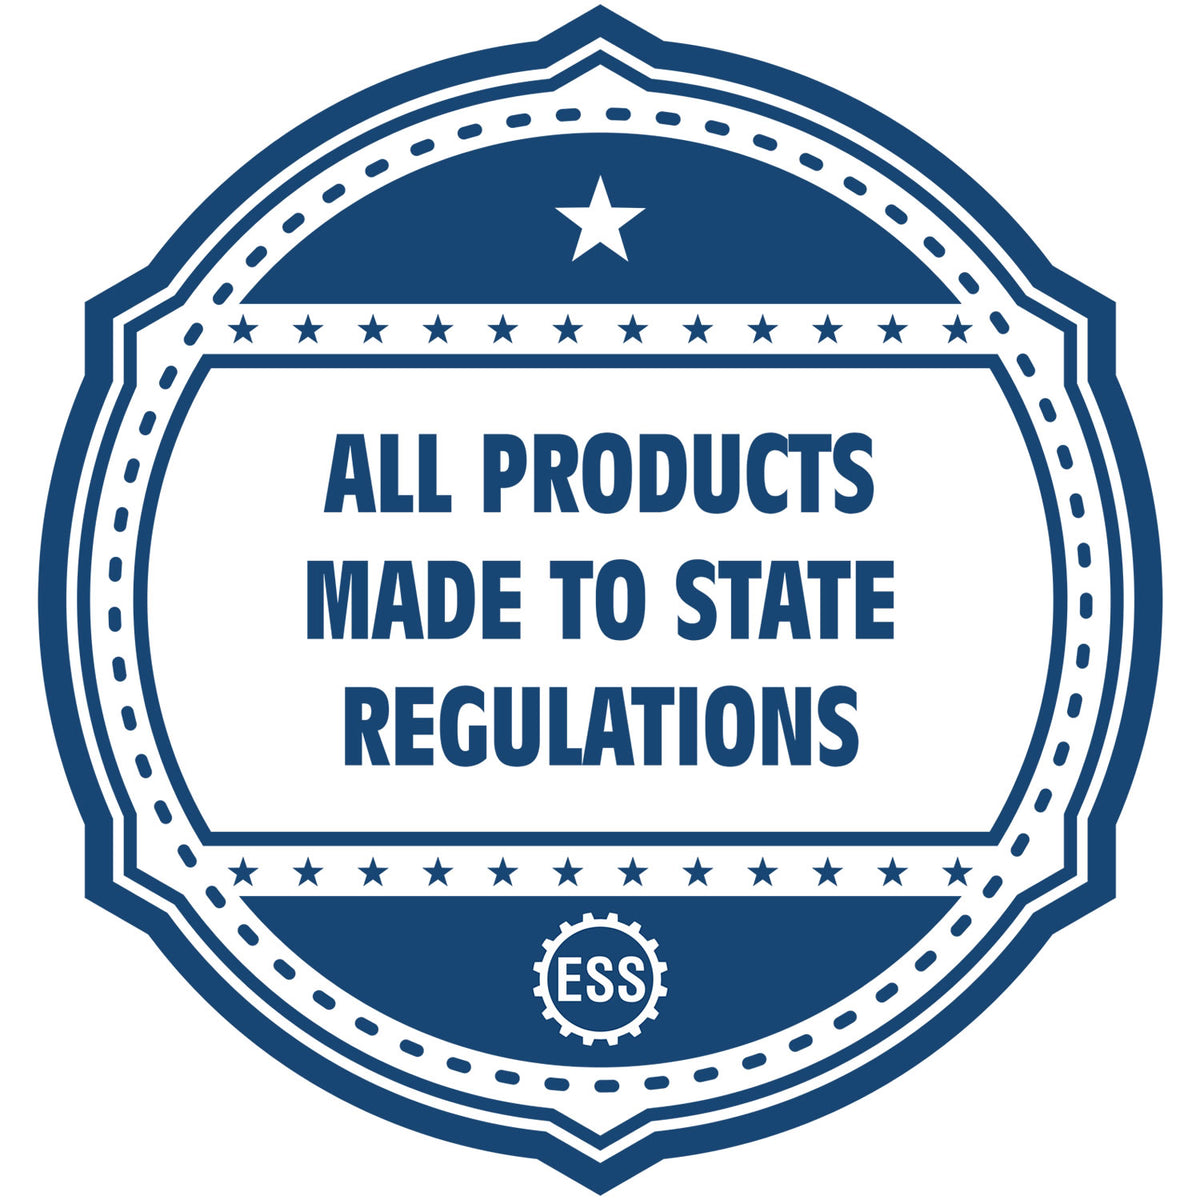 A blue icon or badge for the Hybrid Vermont Landscape Architect Seal showing that this product is made in compliance with state regulations.